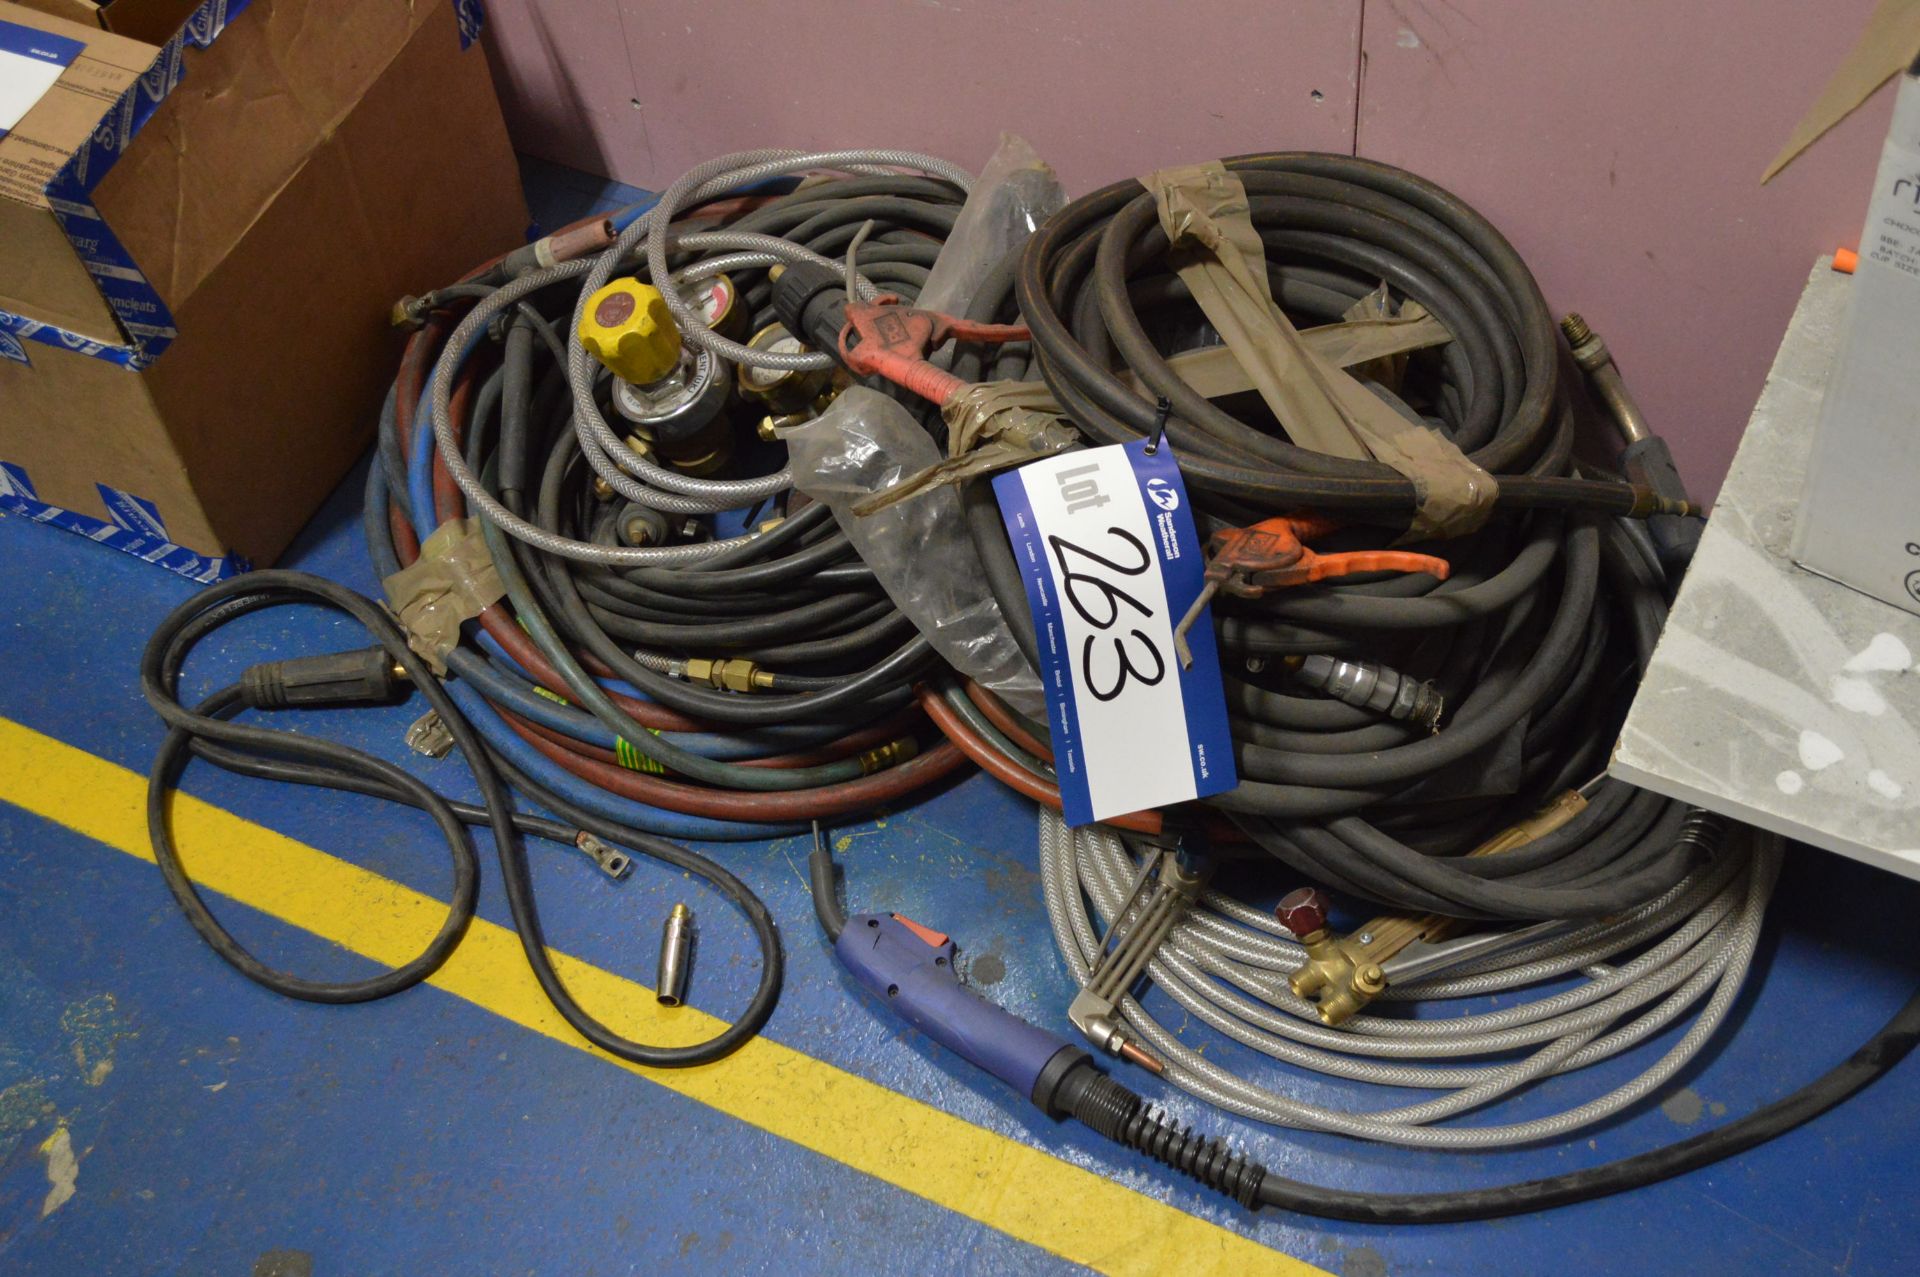 Oxy-Acetylene and Electric Welding Hoses, Leads An